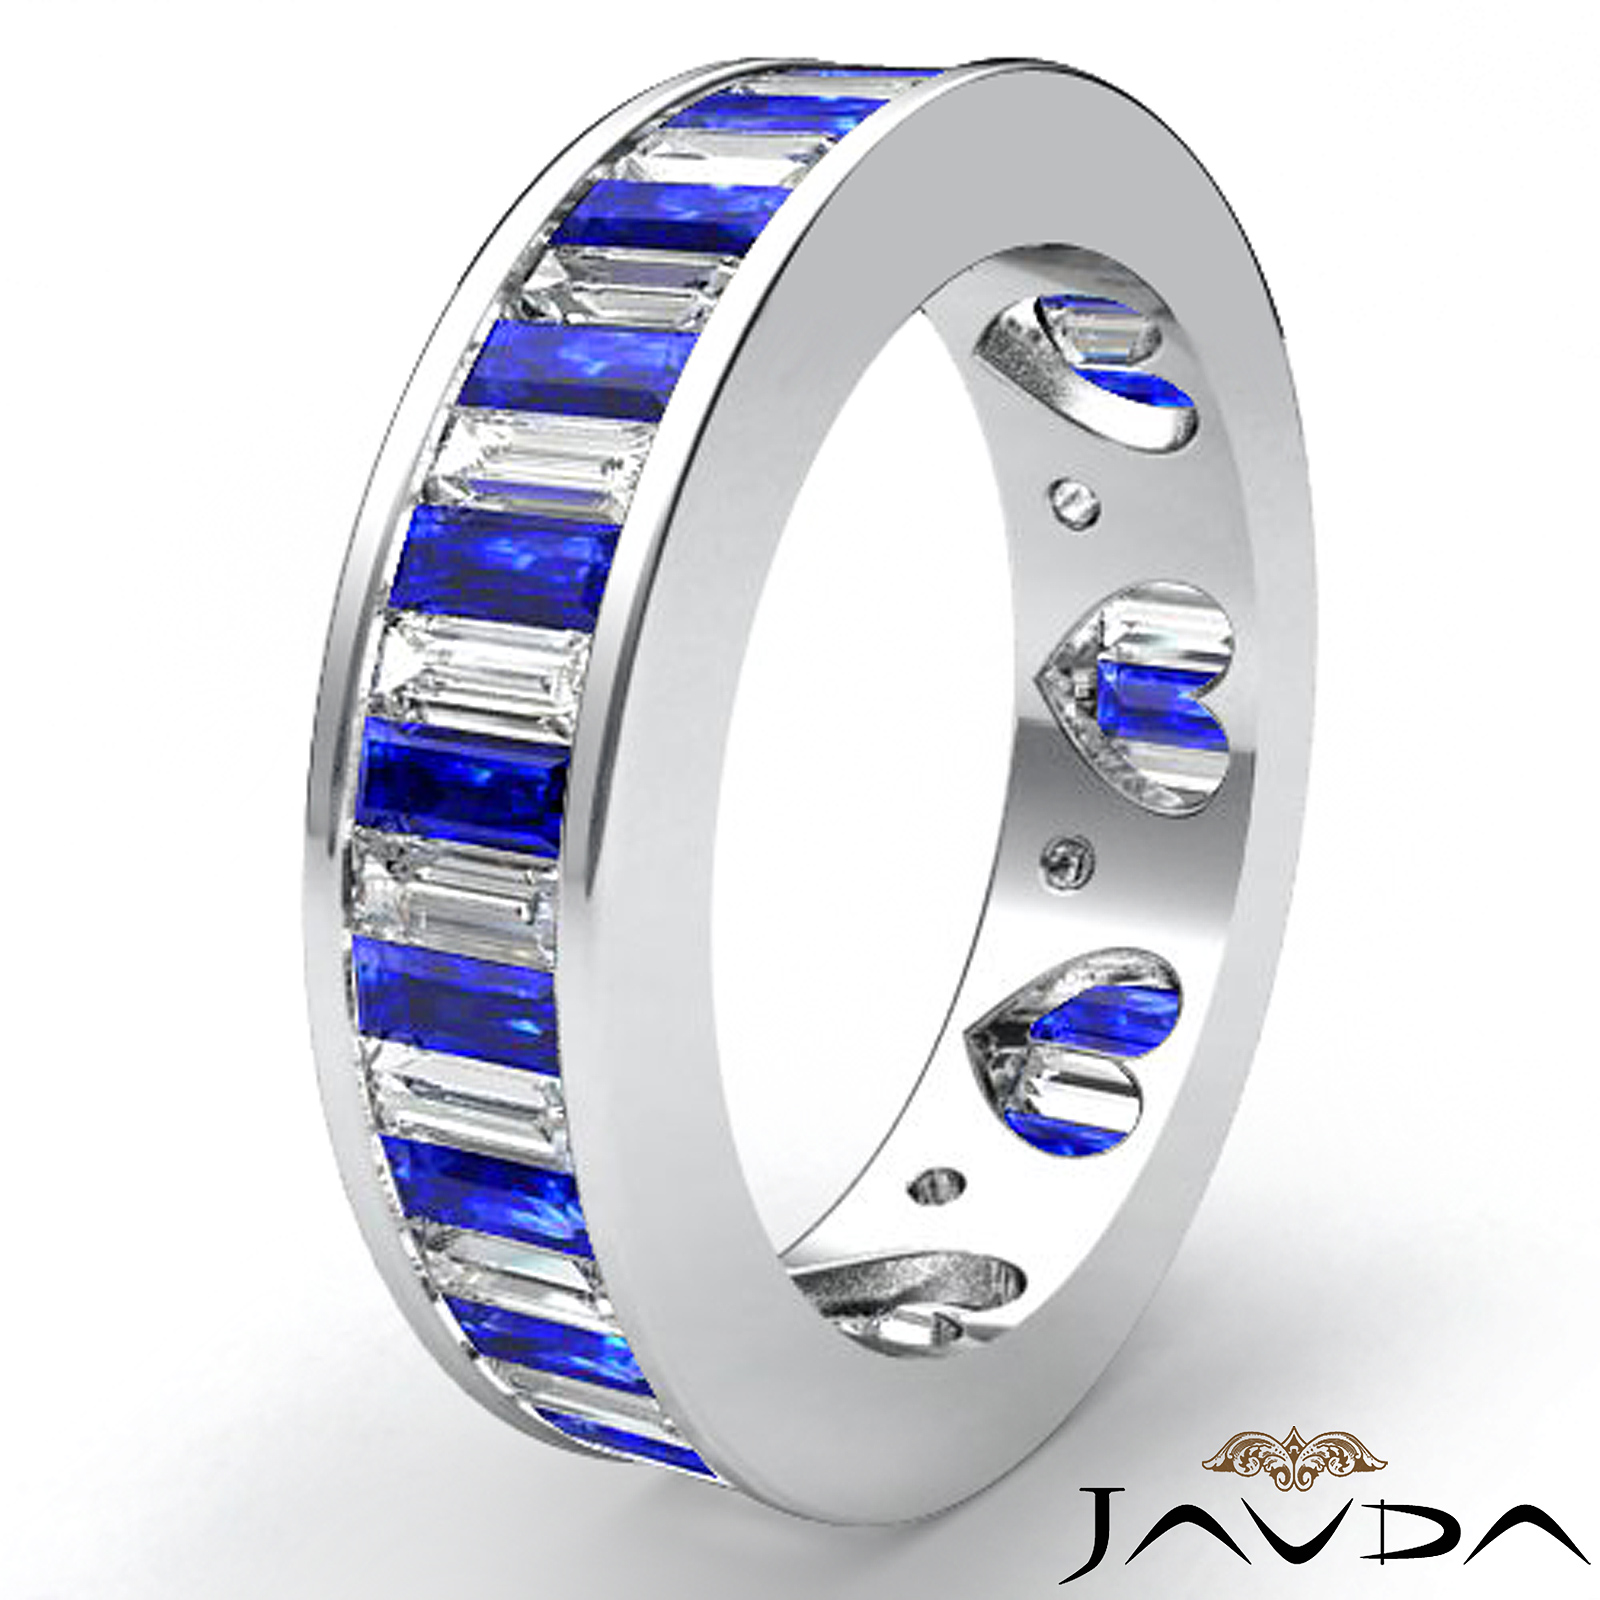 Details about   2ct Baguette Cut Blue Sapphire Wedding Band Ring Eternity 14k White Gold Finish